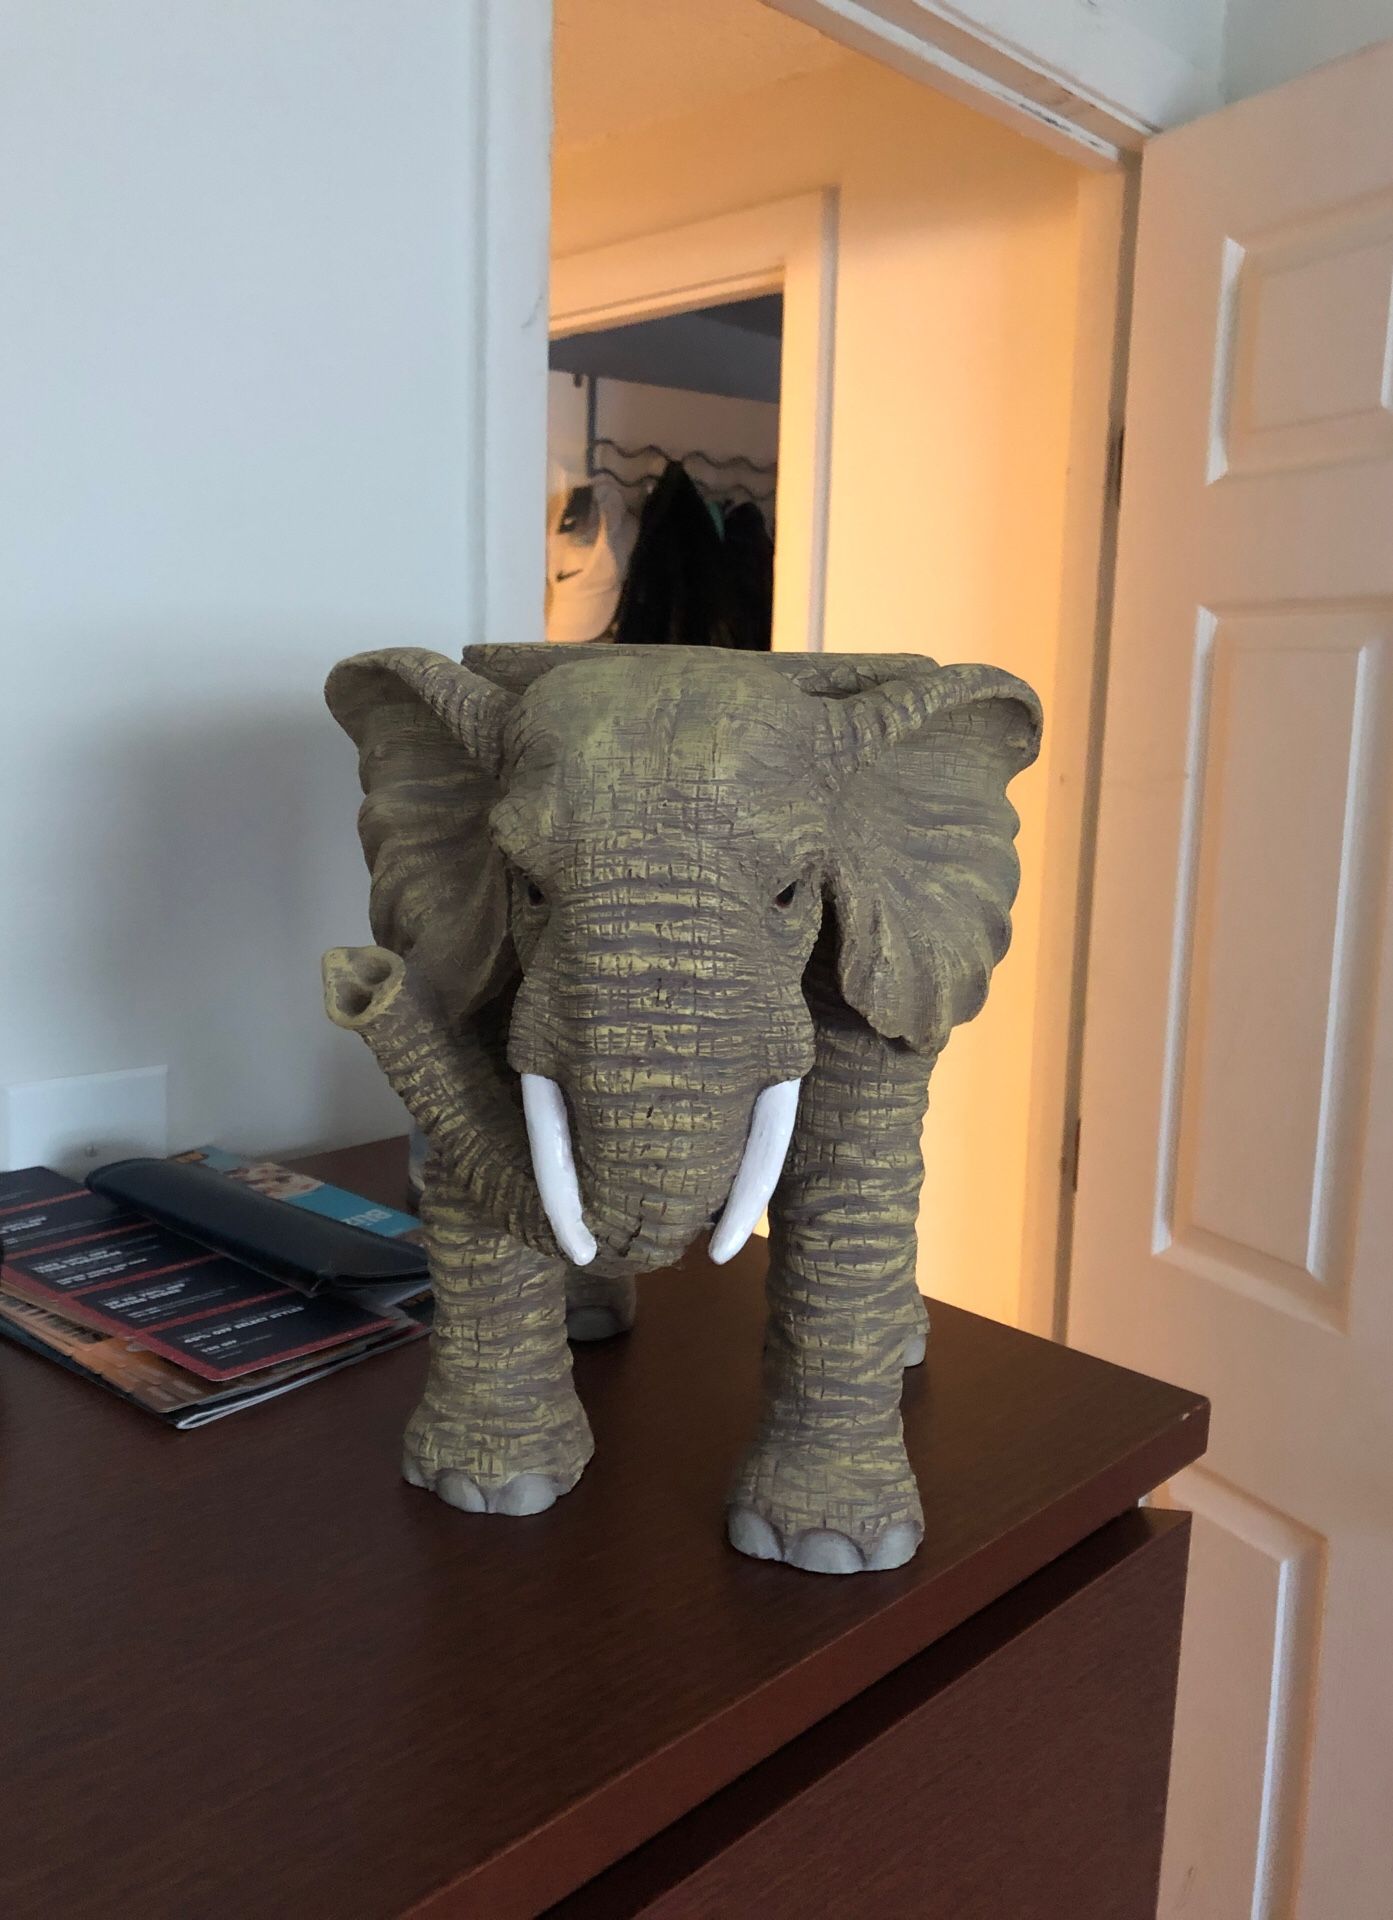 Decorative Elephant can be used as plant holder or a little chair for toddlers